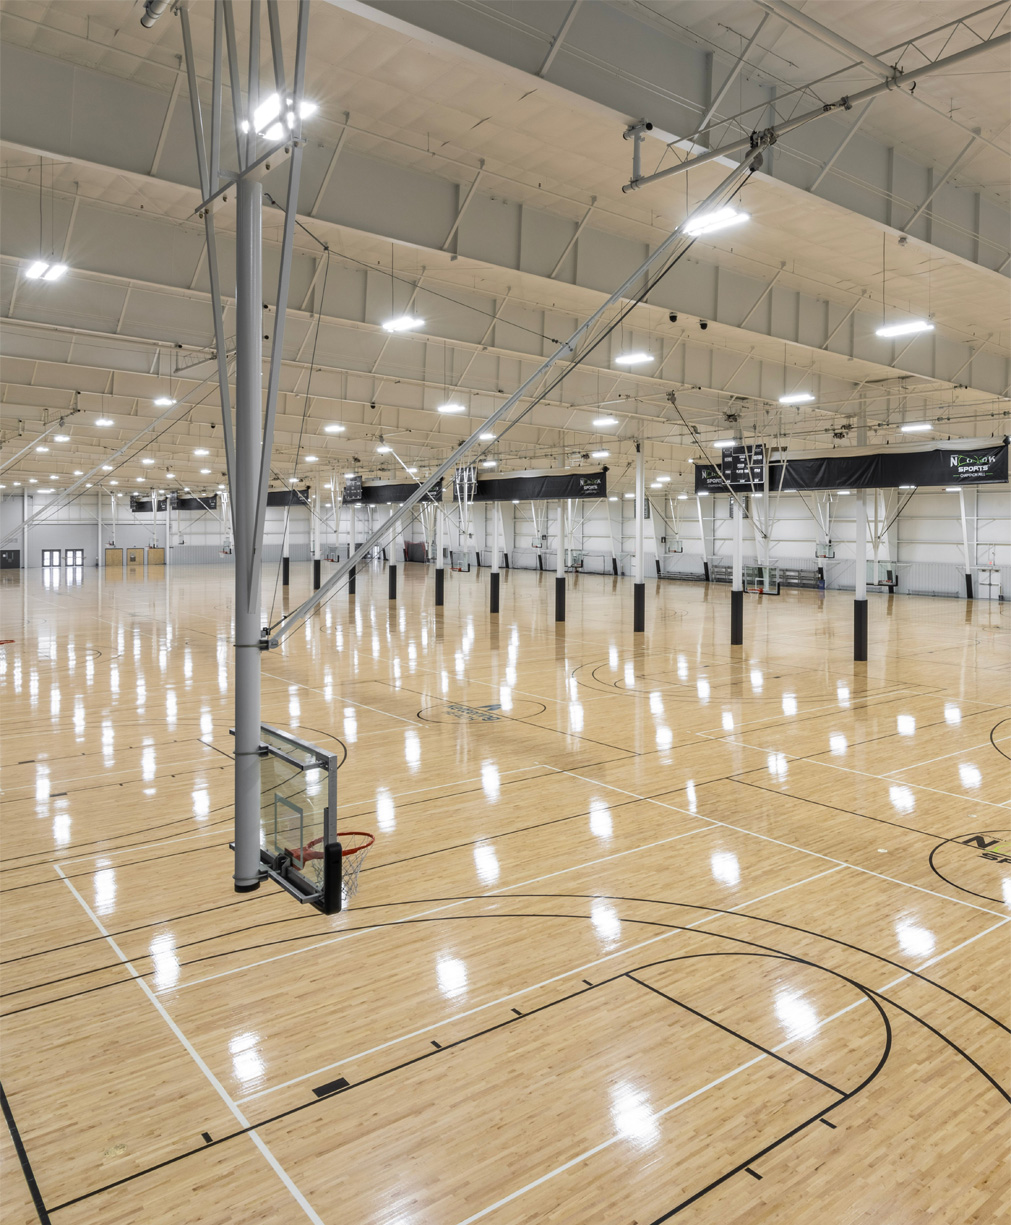 The basket ball courts of Spooky Nook